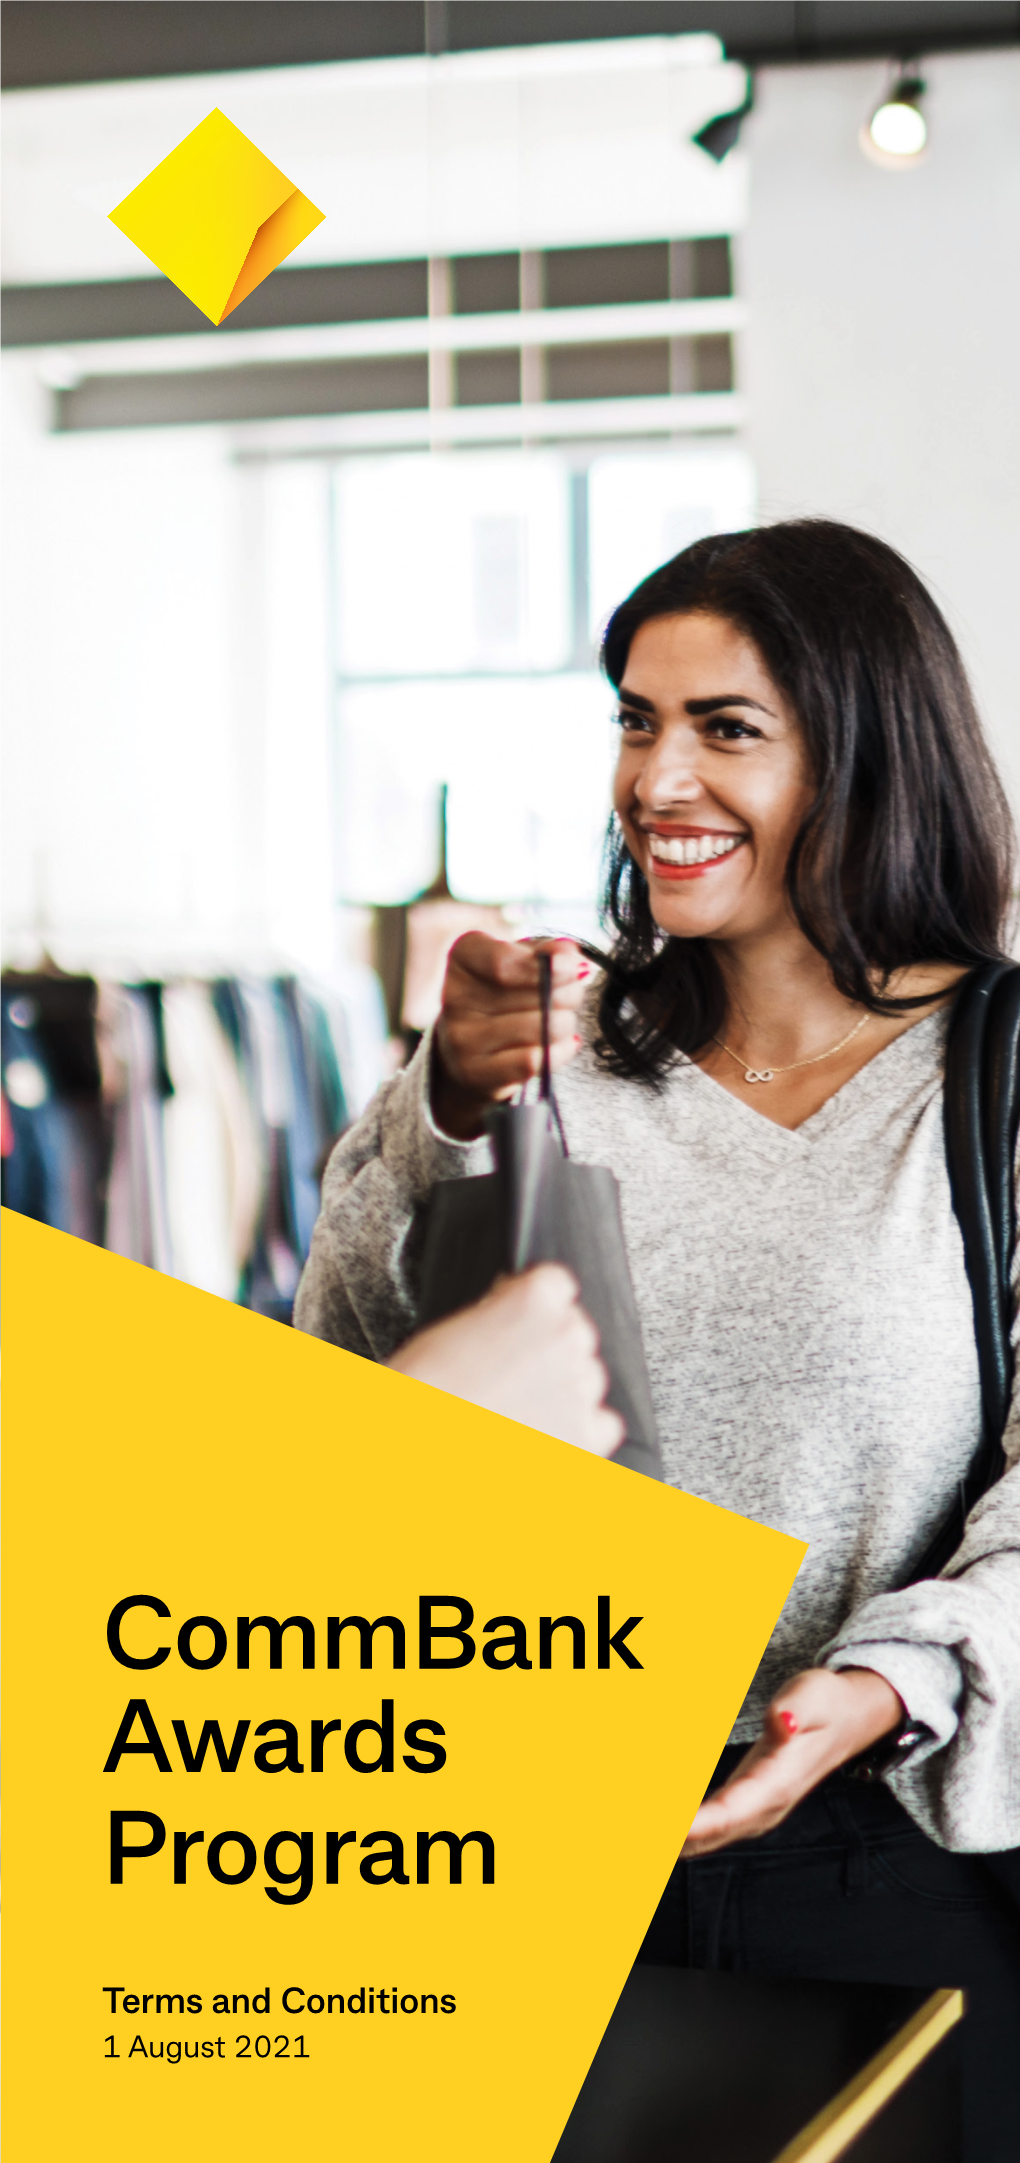 Commbank Awards Program Terms and Conditions